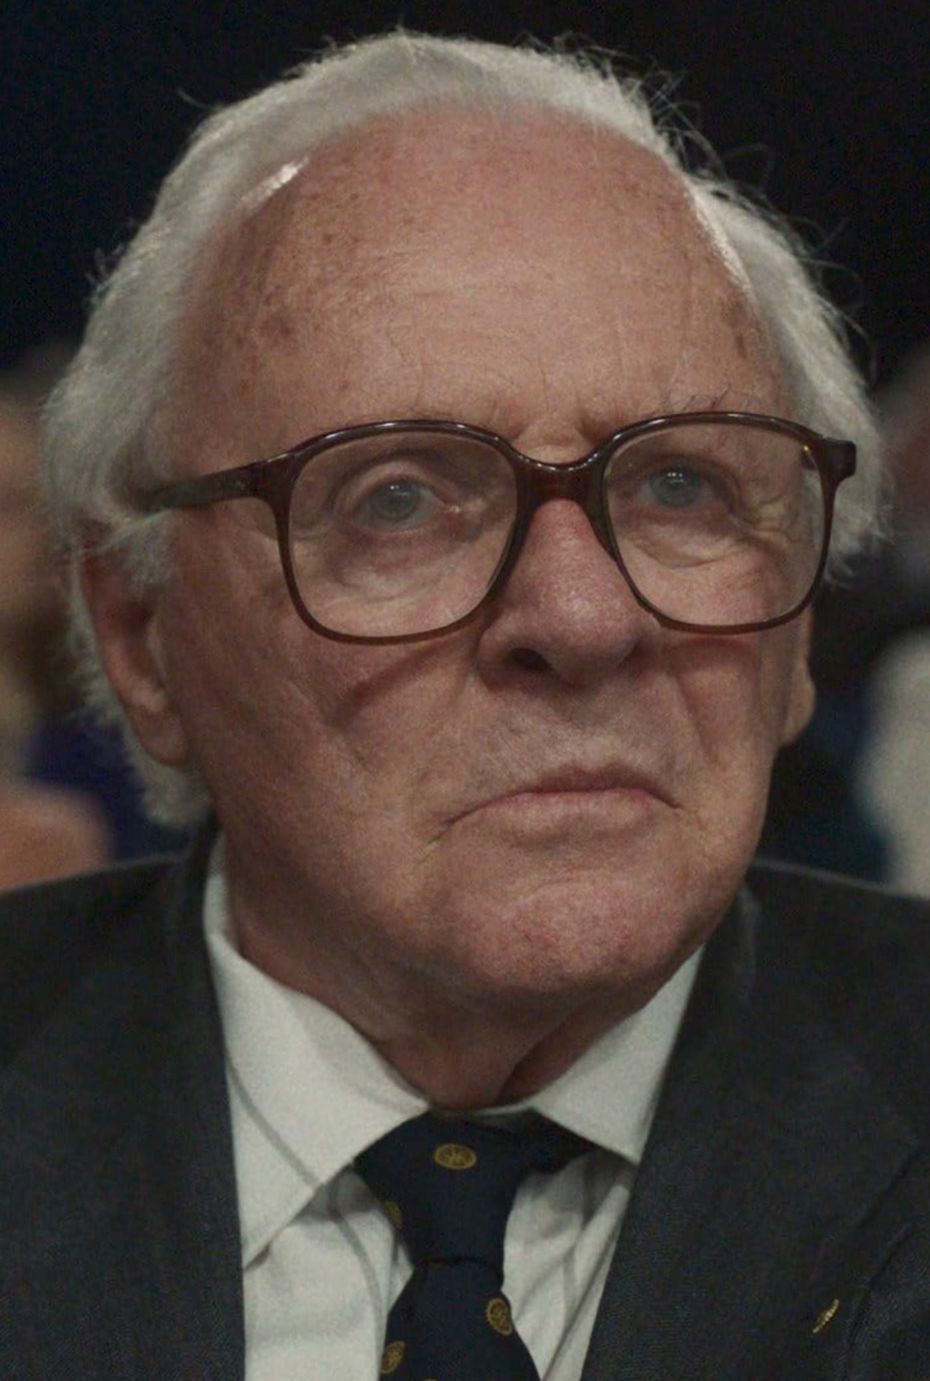 Anthony Hopkins playing the part of Nicholas Winton in one life